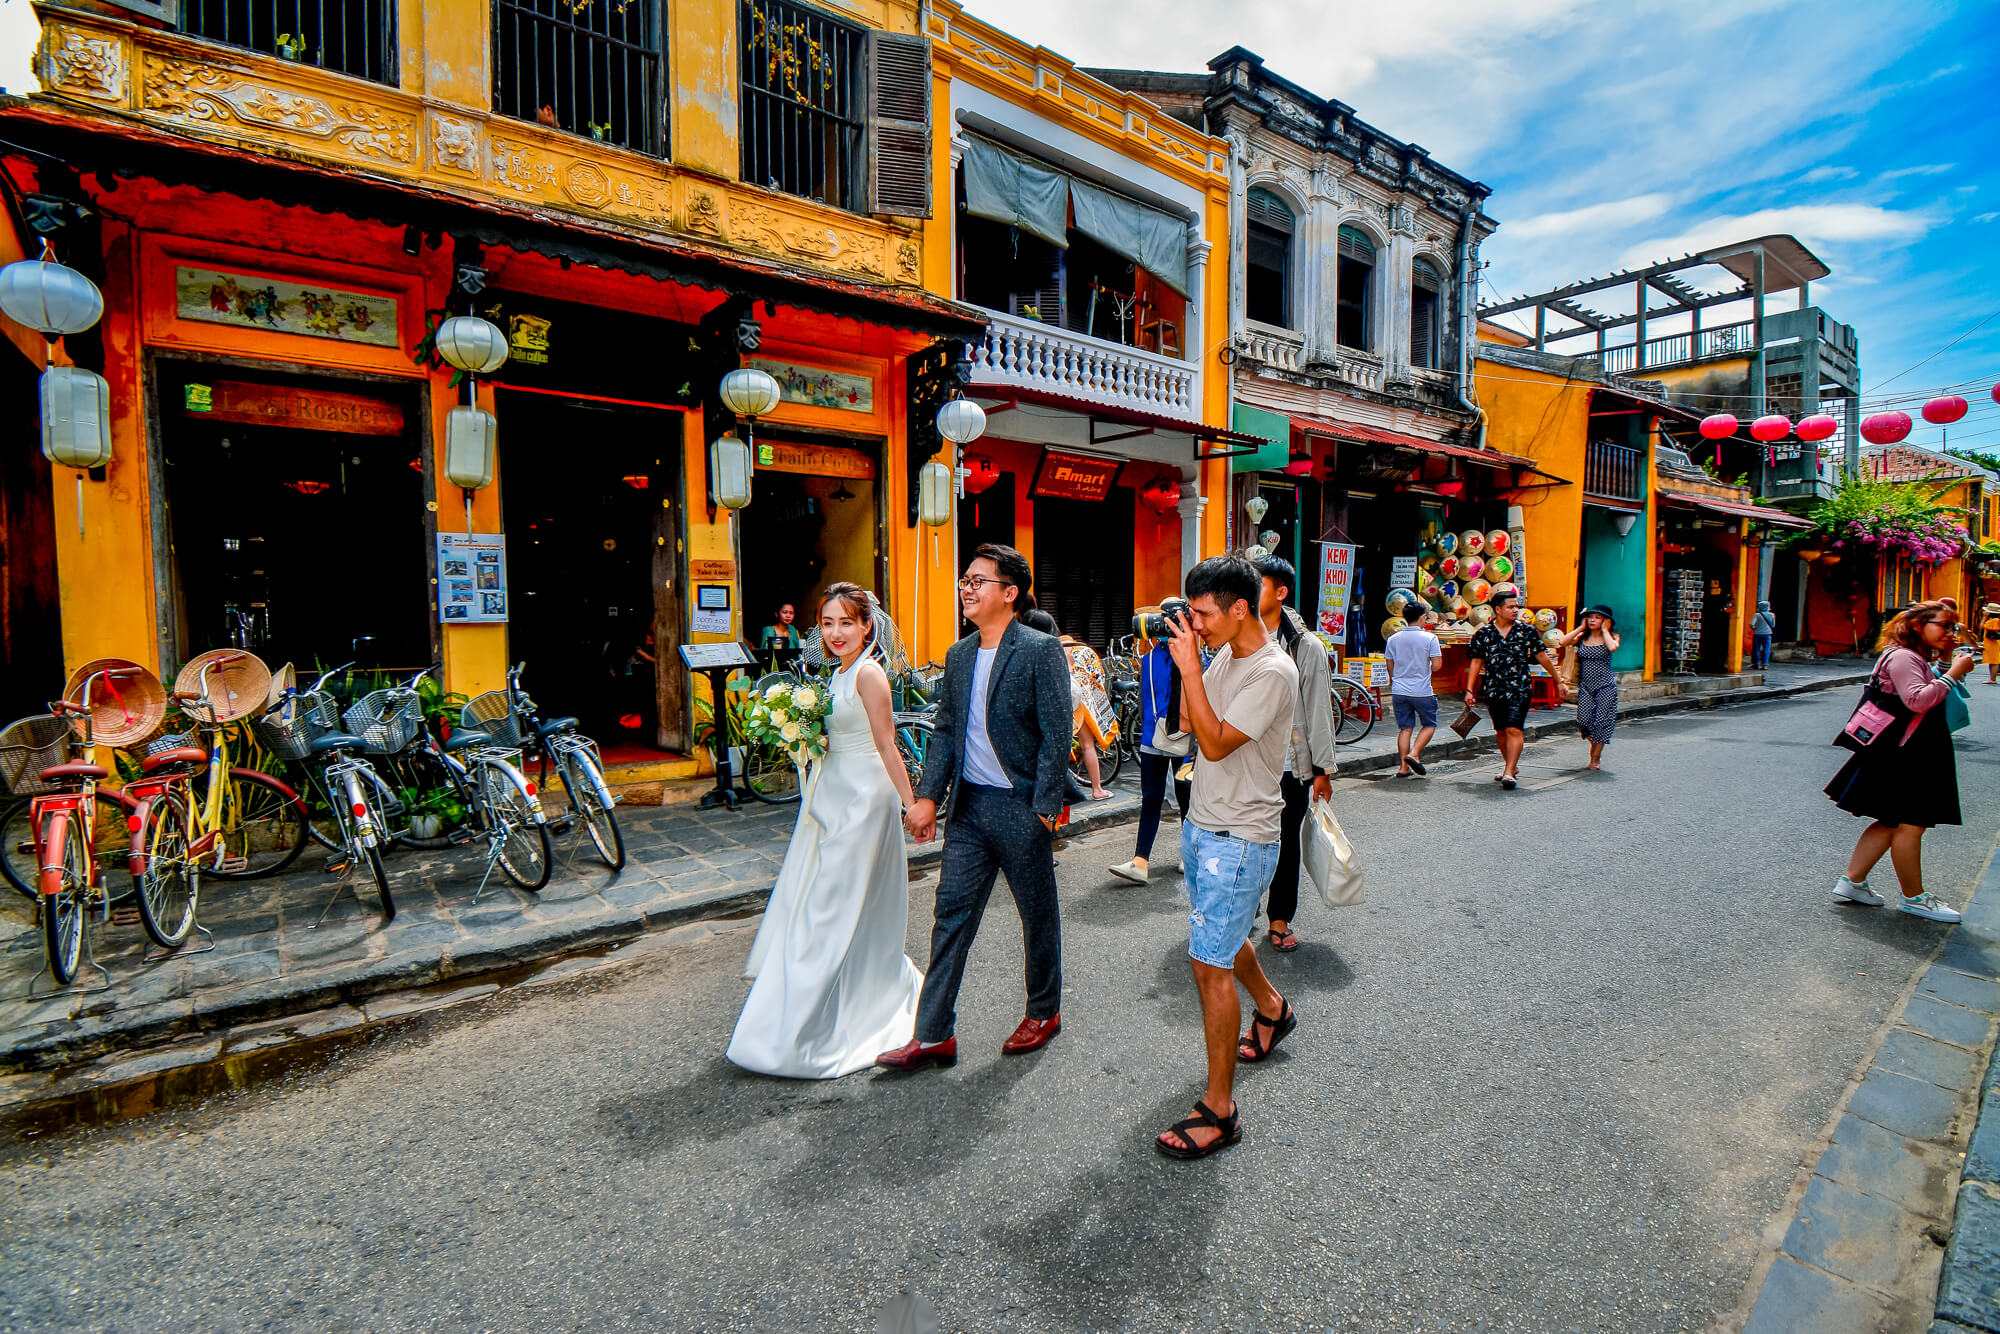 Check in Hoi An ancient town